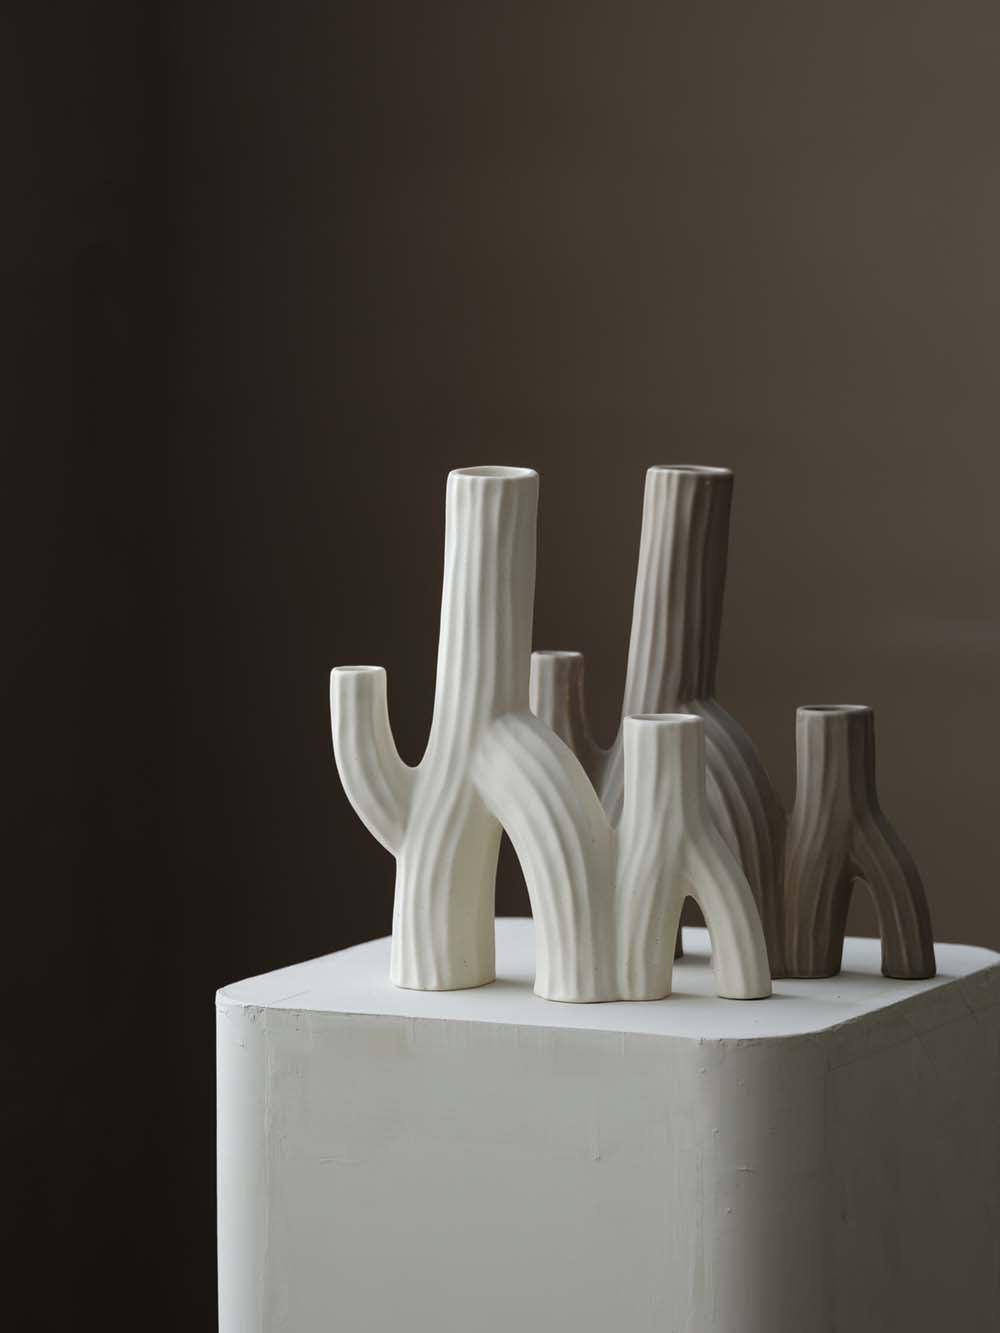 Branches Textured Vase - WENSHUO